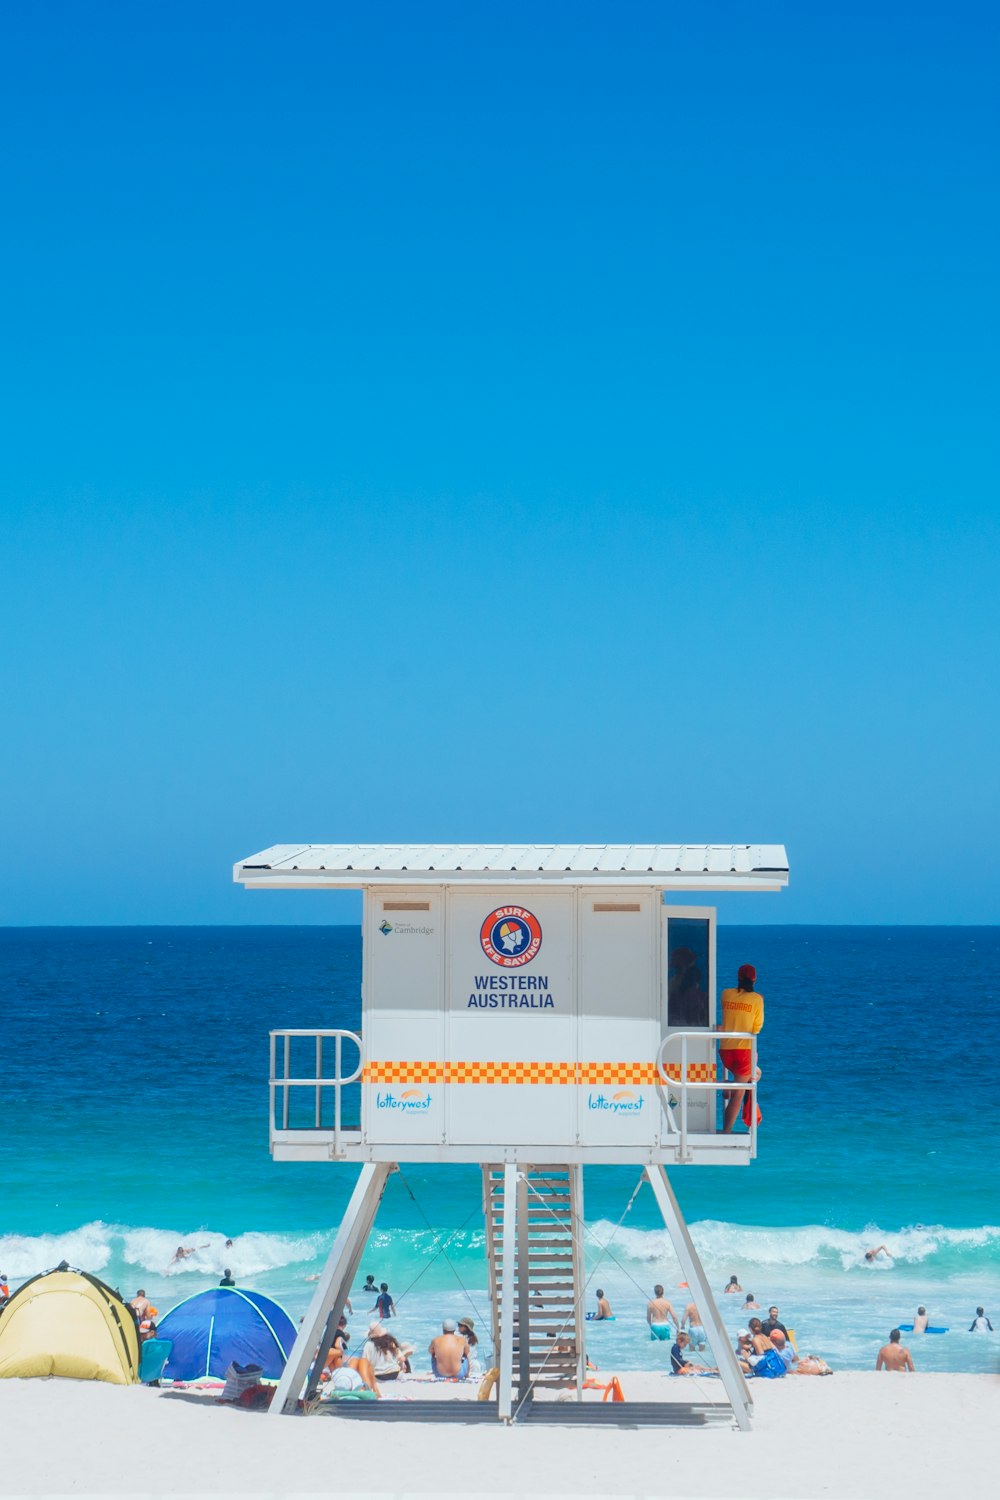 a lifeguard stand on the beach with people in the water